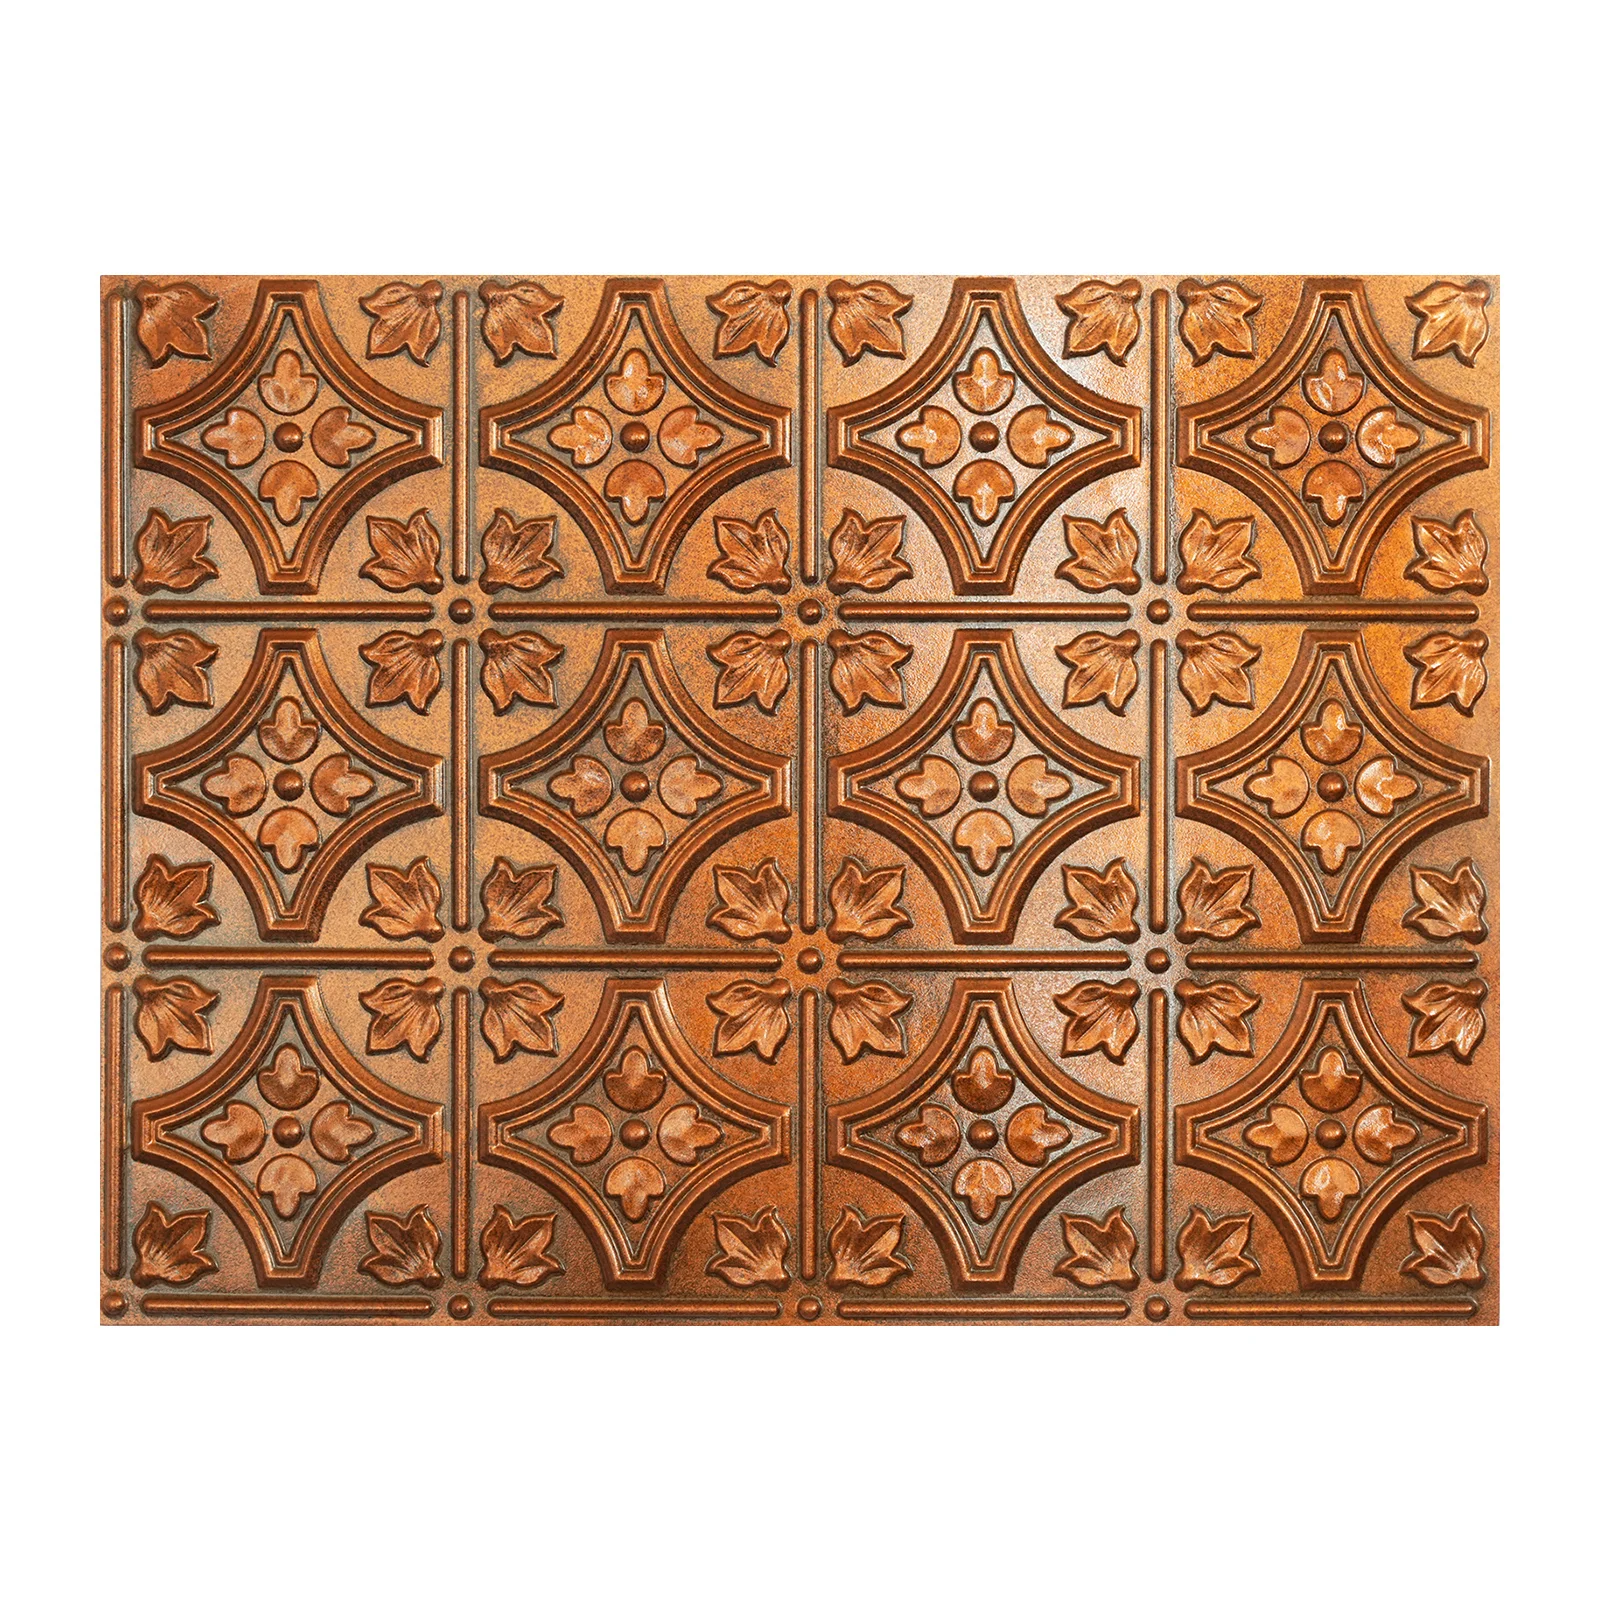 Decorative ceiling panels Emboss interior wall panel Vintage Pattern Tin ceiling Tiles PLB10 Archaic copper